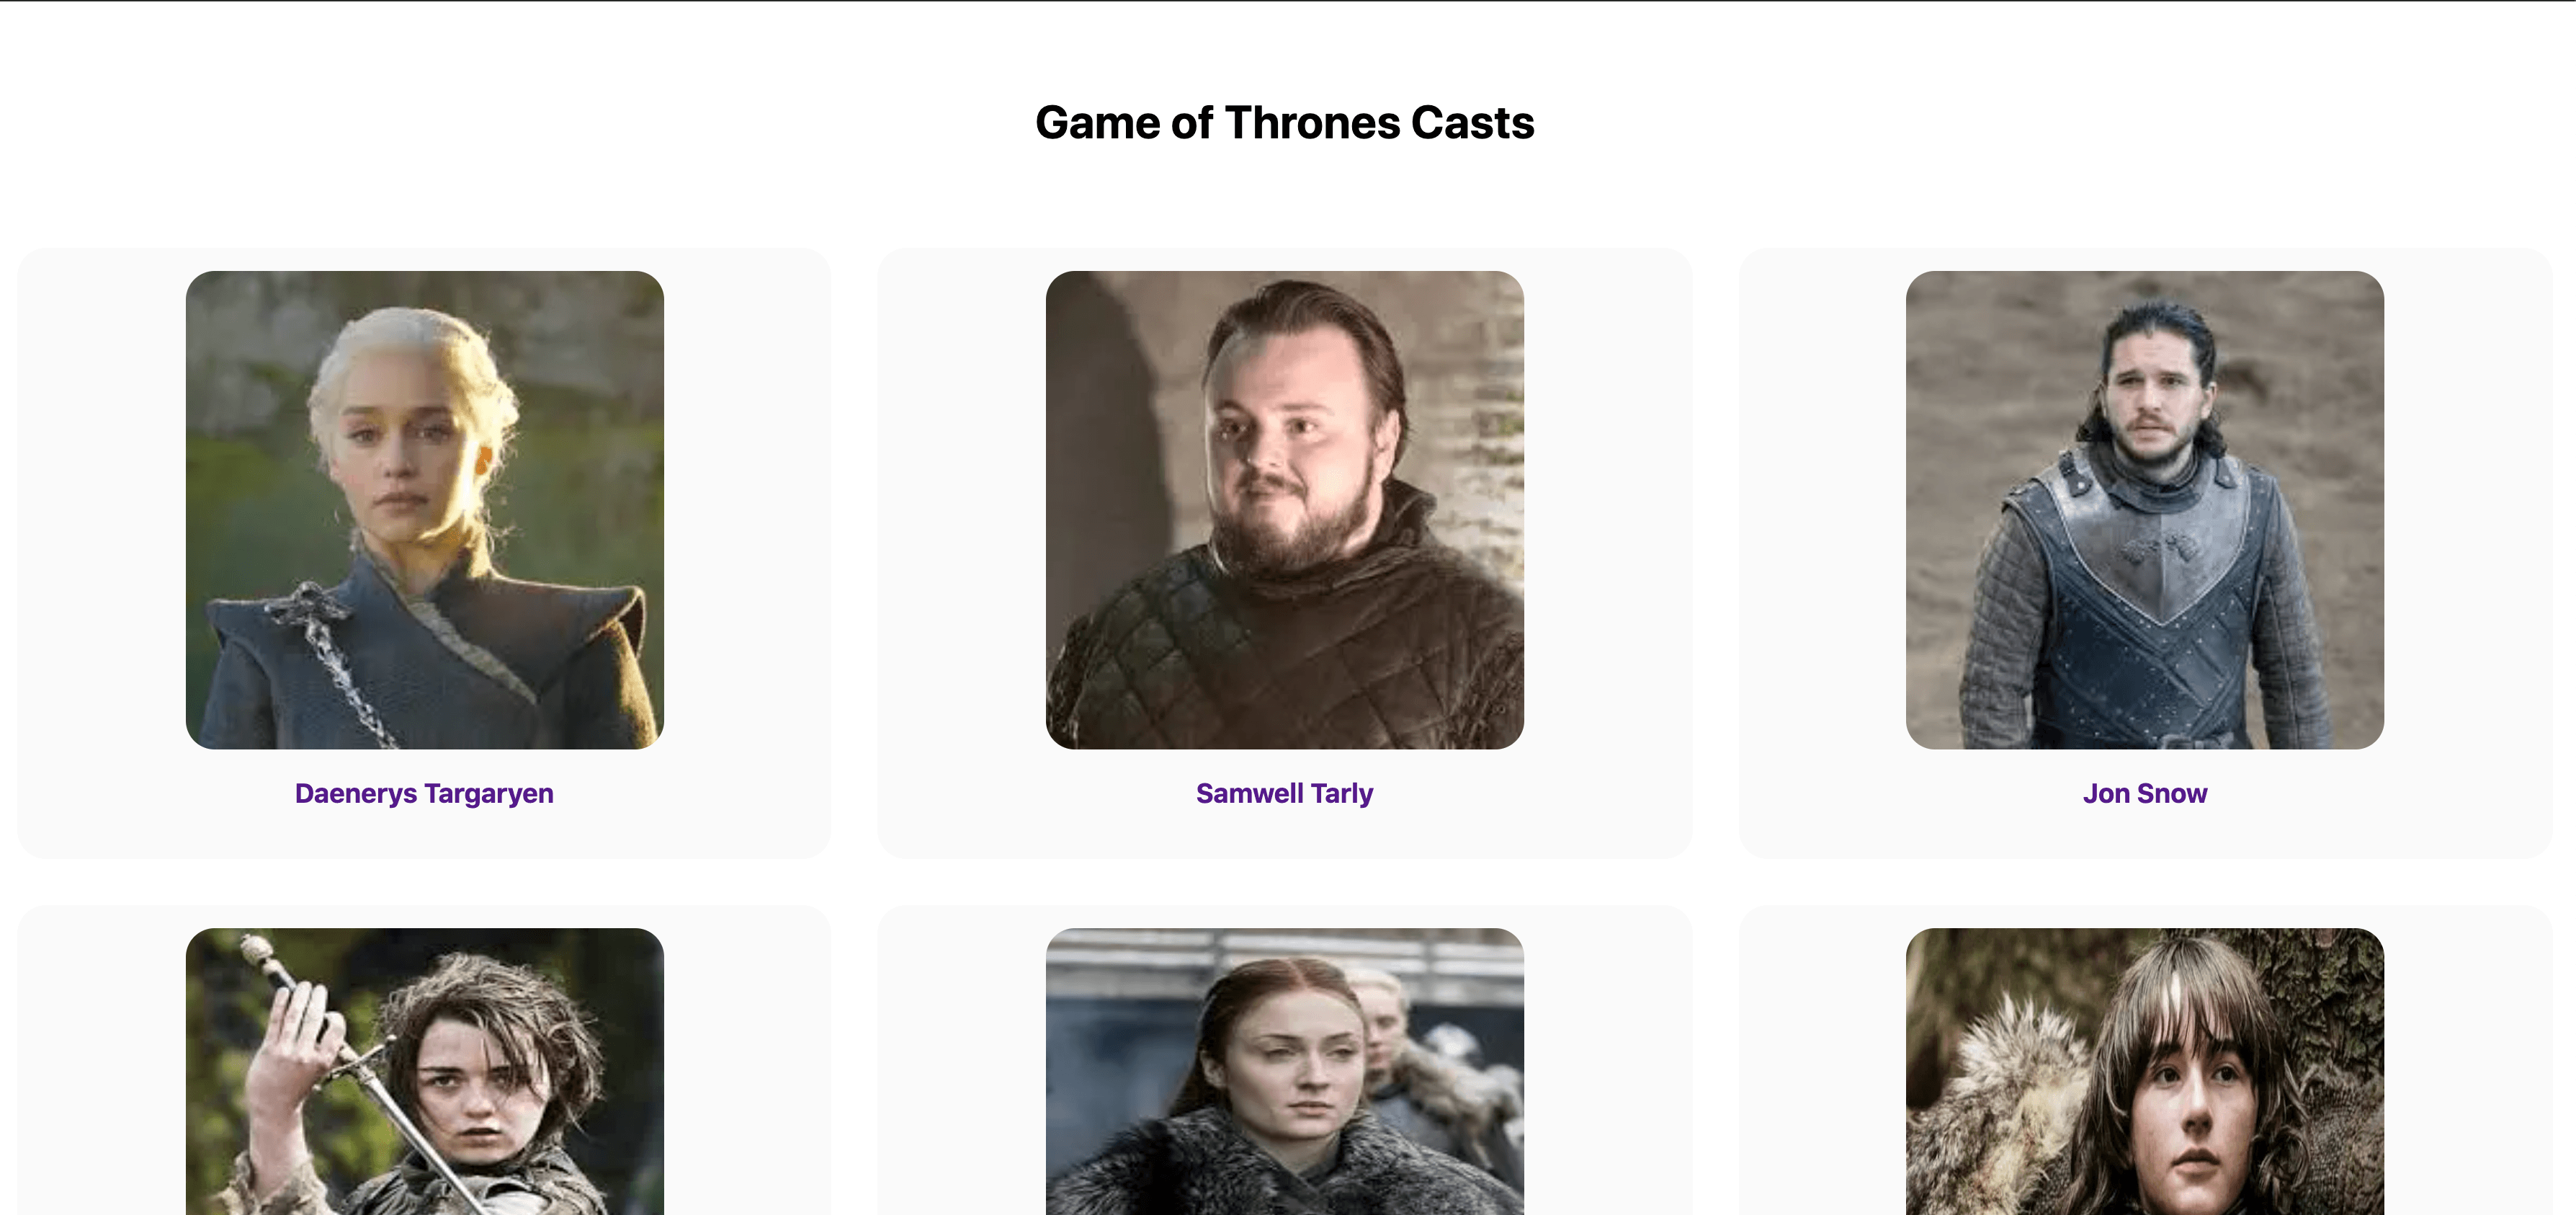 A list of characters of Game of Thrones